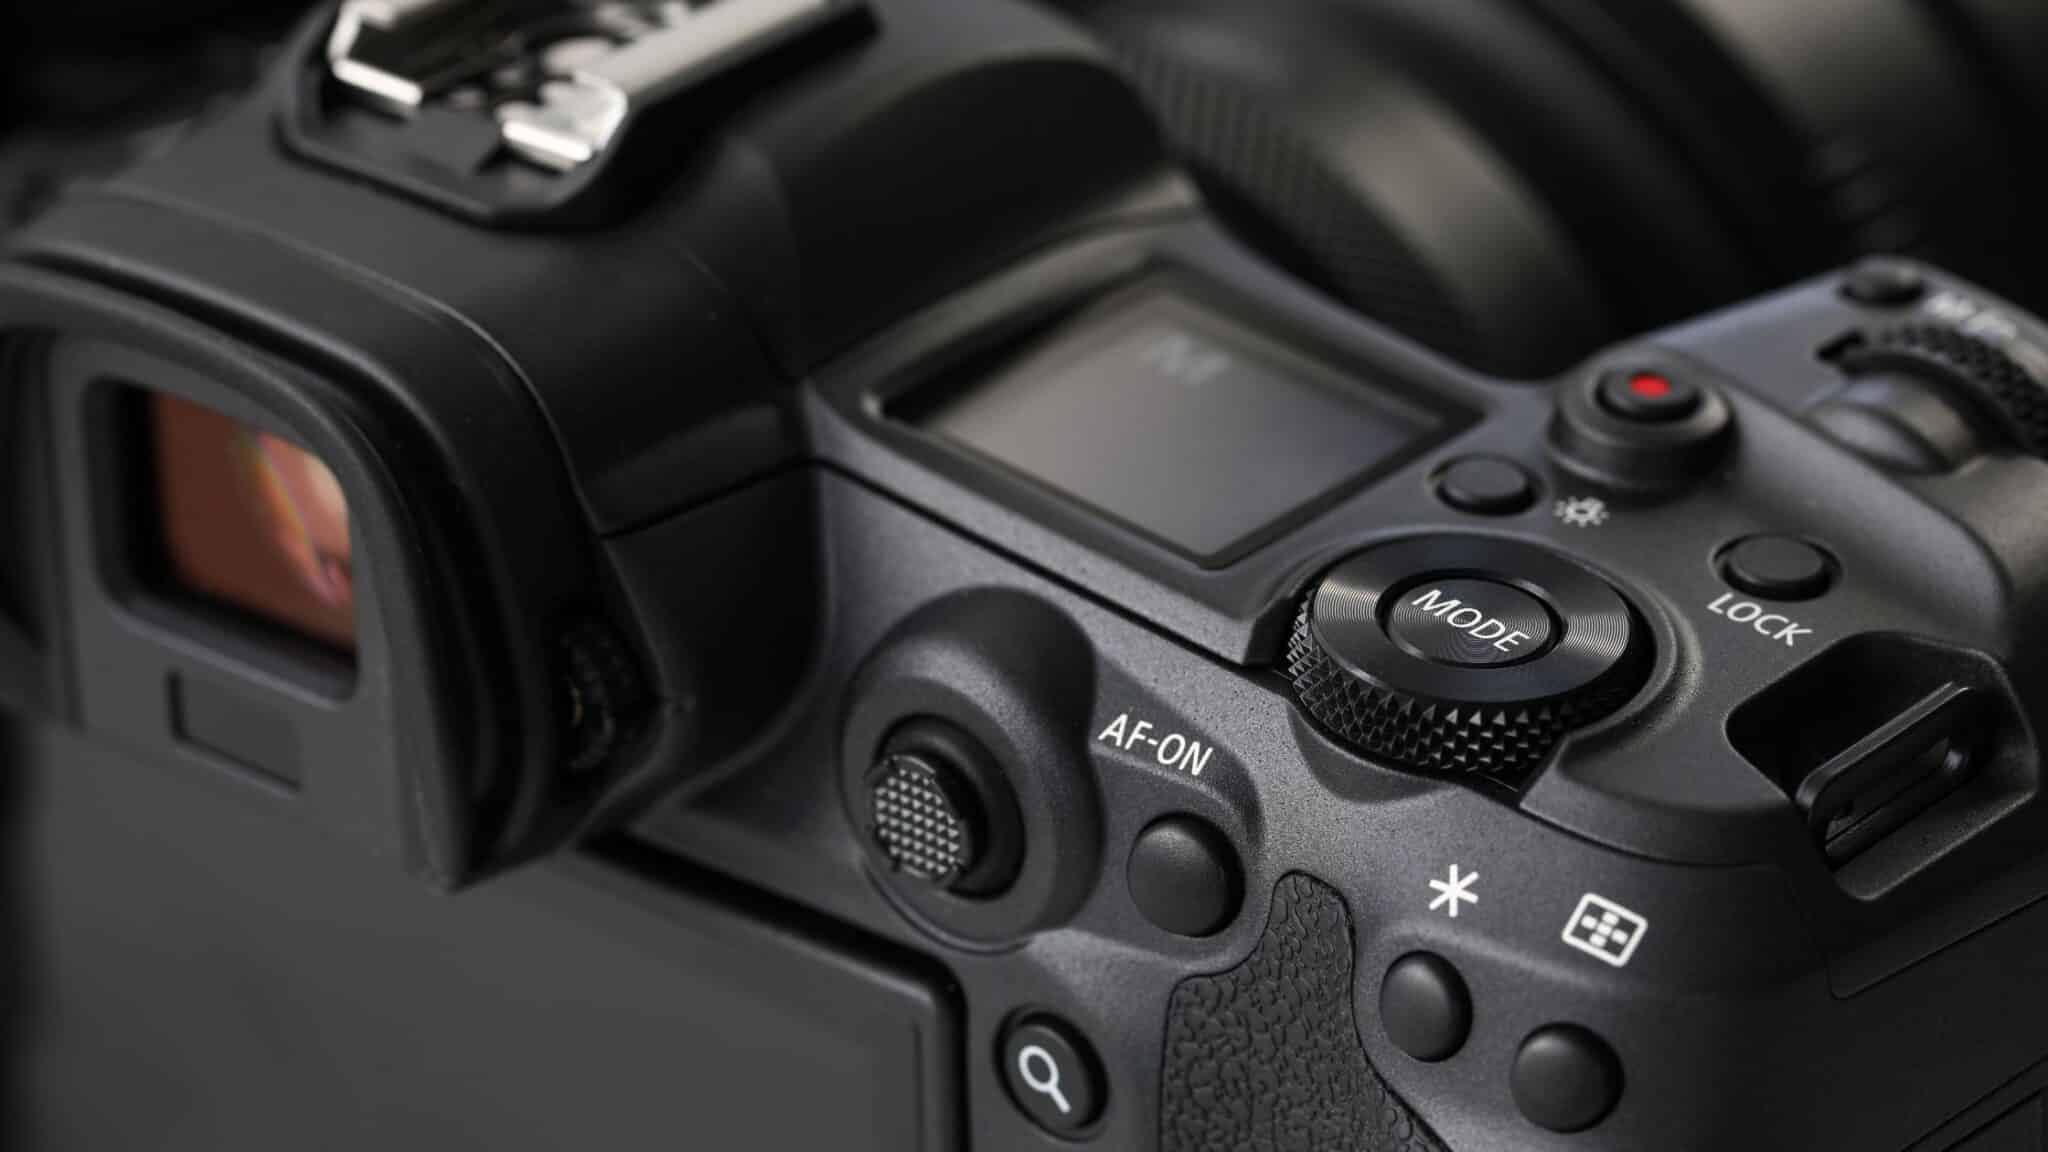 Mirrorless cameras have revolutionized the world of digital photography and videography. 